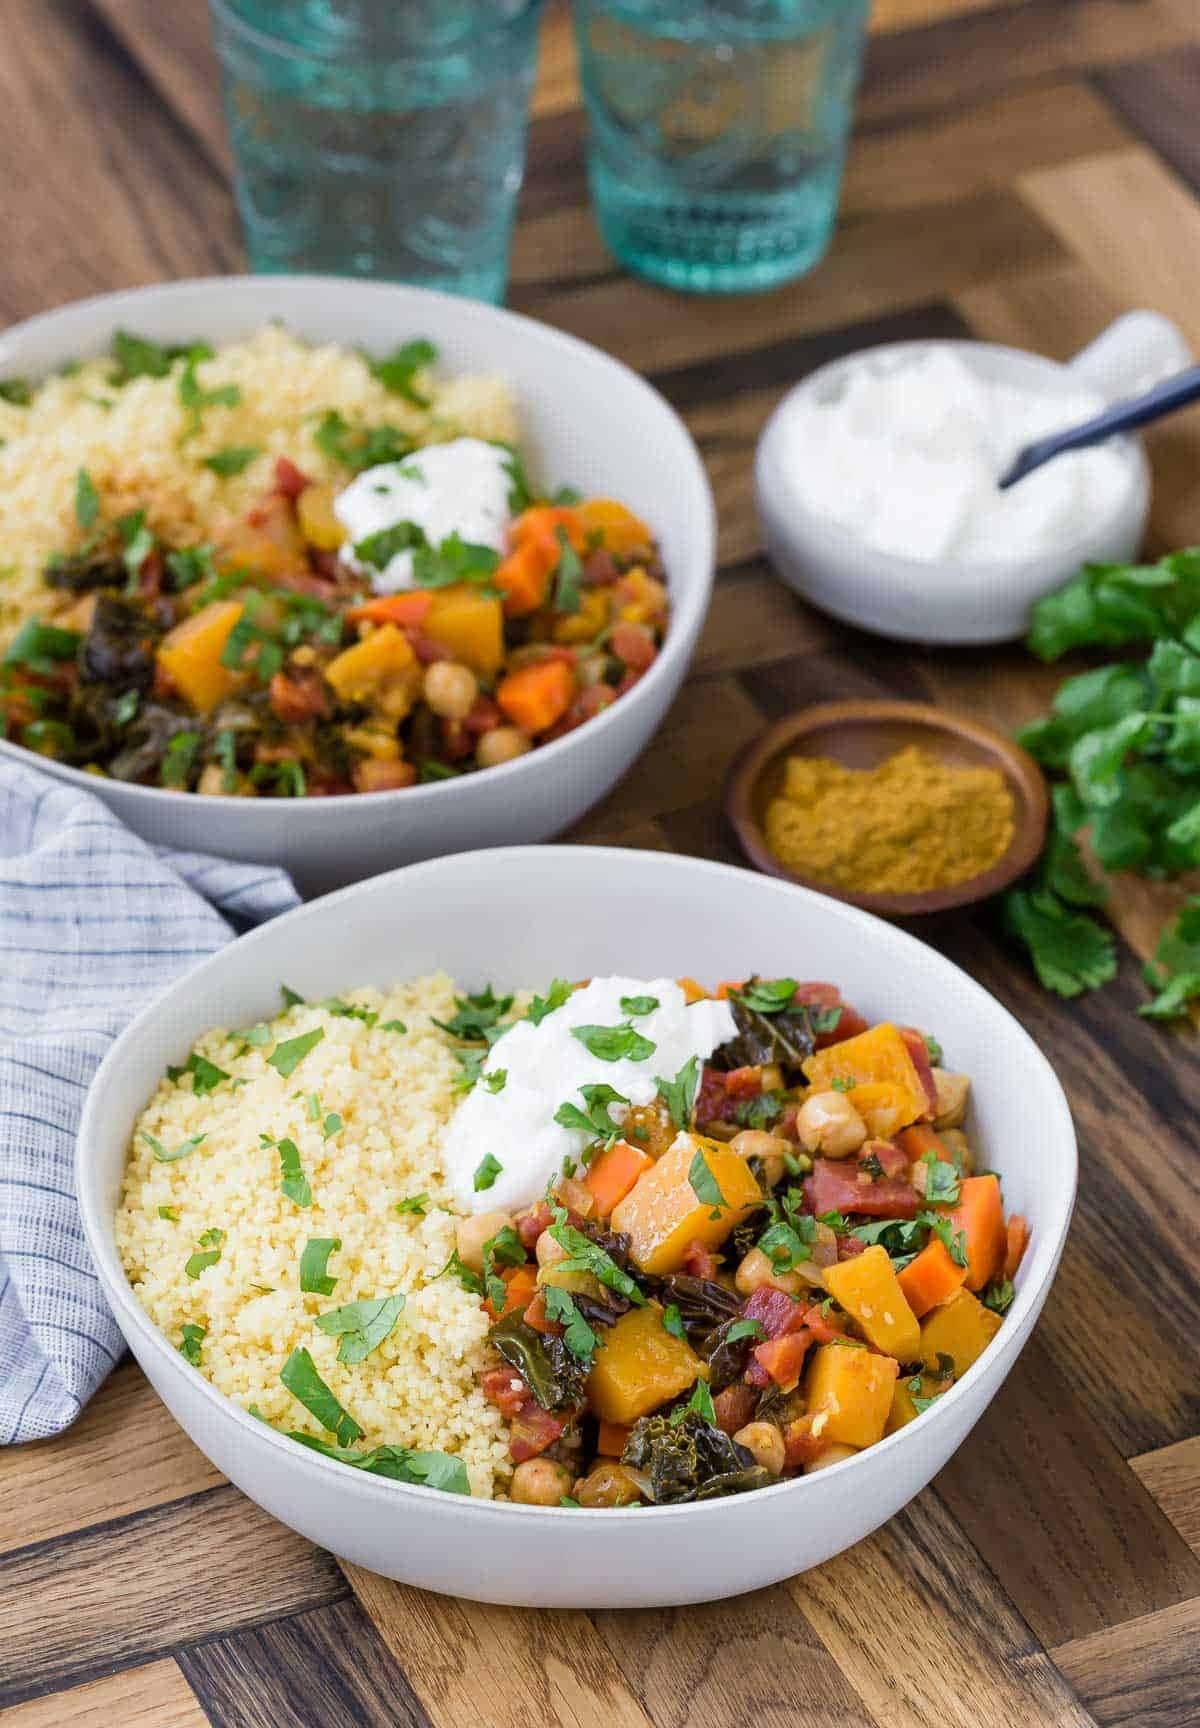 Homemade Moroccan Stew with Butternut Squash and Chickpeas